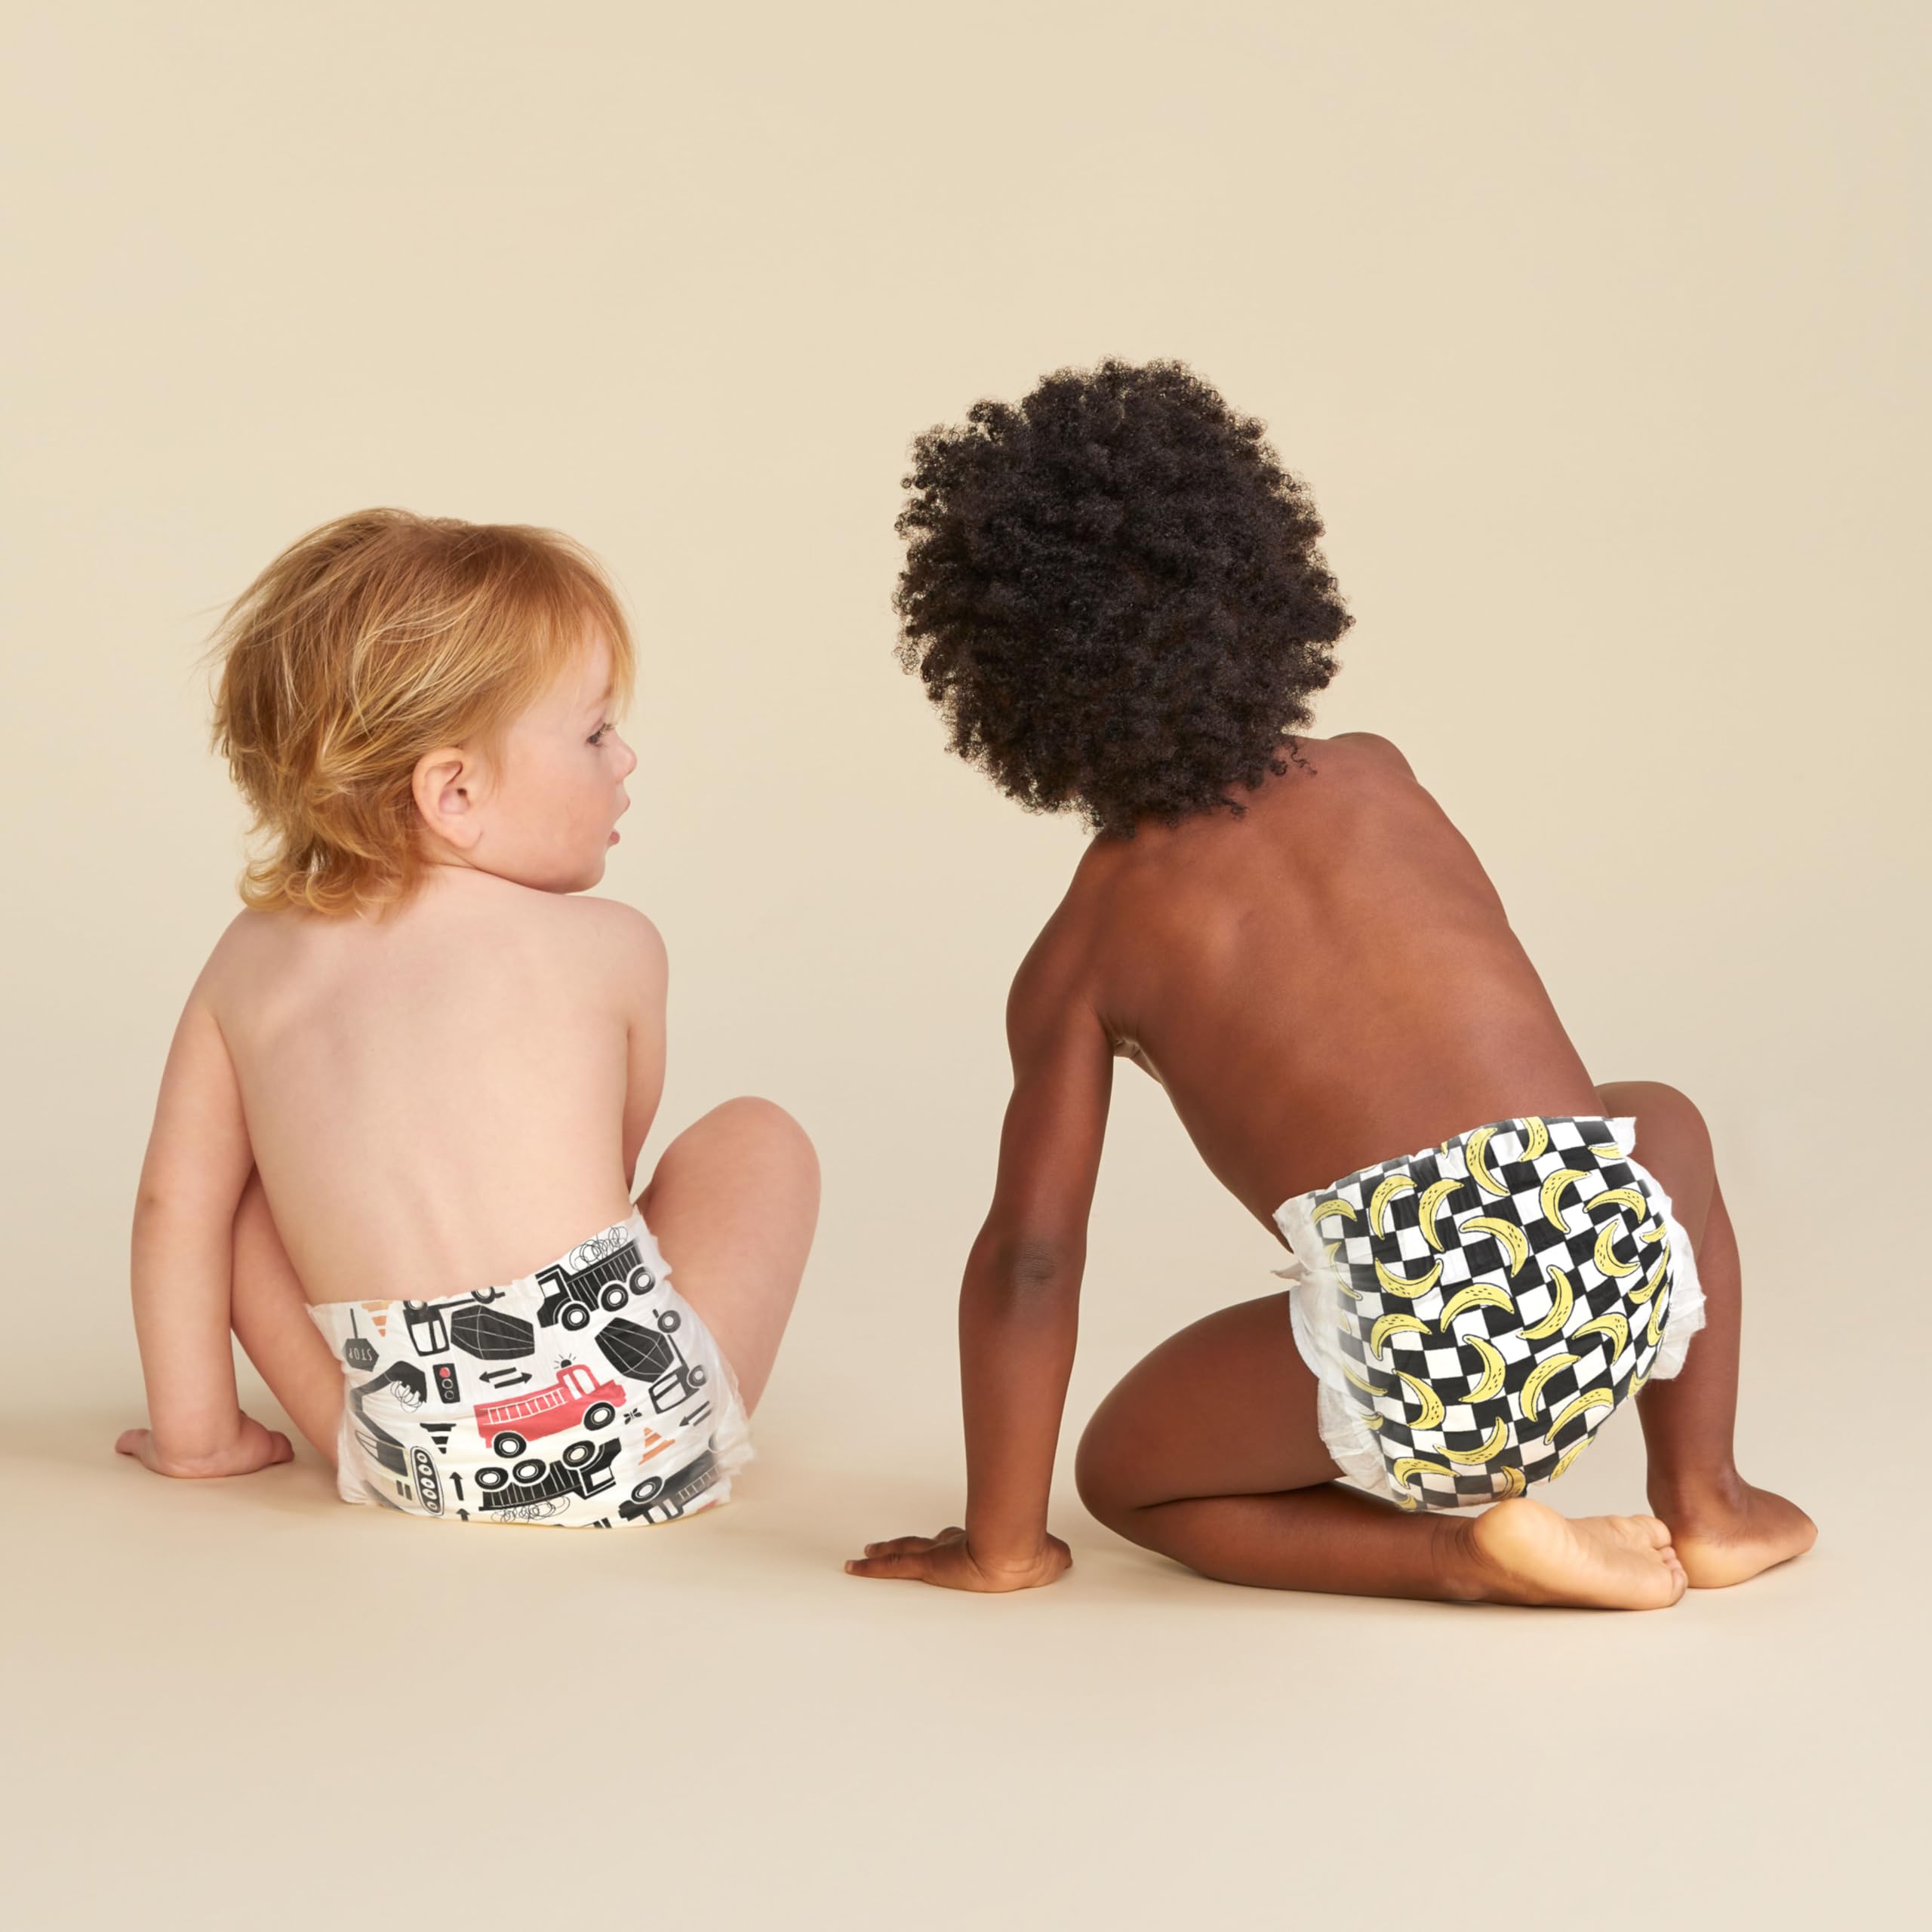 The Honest Company Clean Conscious Diapers | Plant-Based, Sustainable | Big Trucks + So Bananas | Club Box, Size 5 (27+ lbs), 44 Count